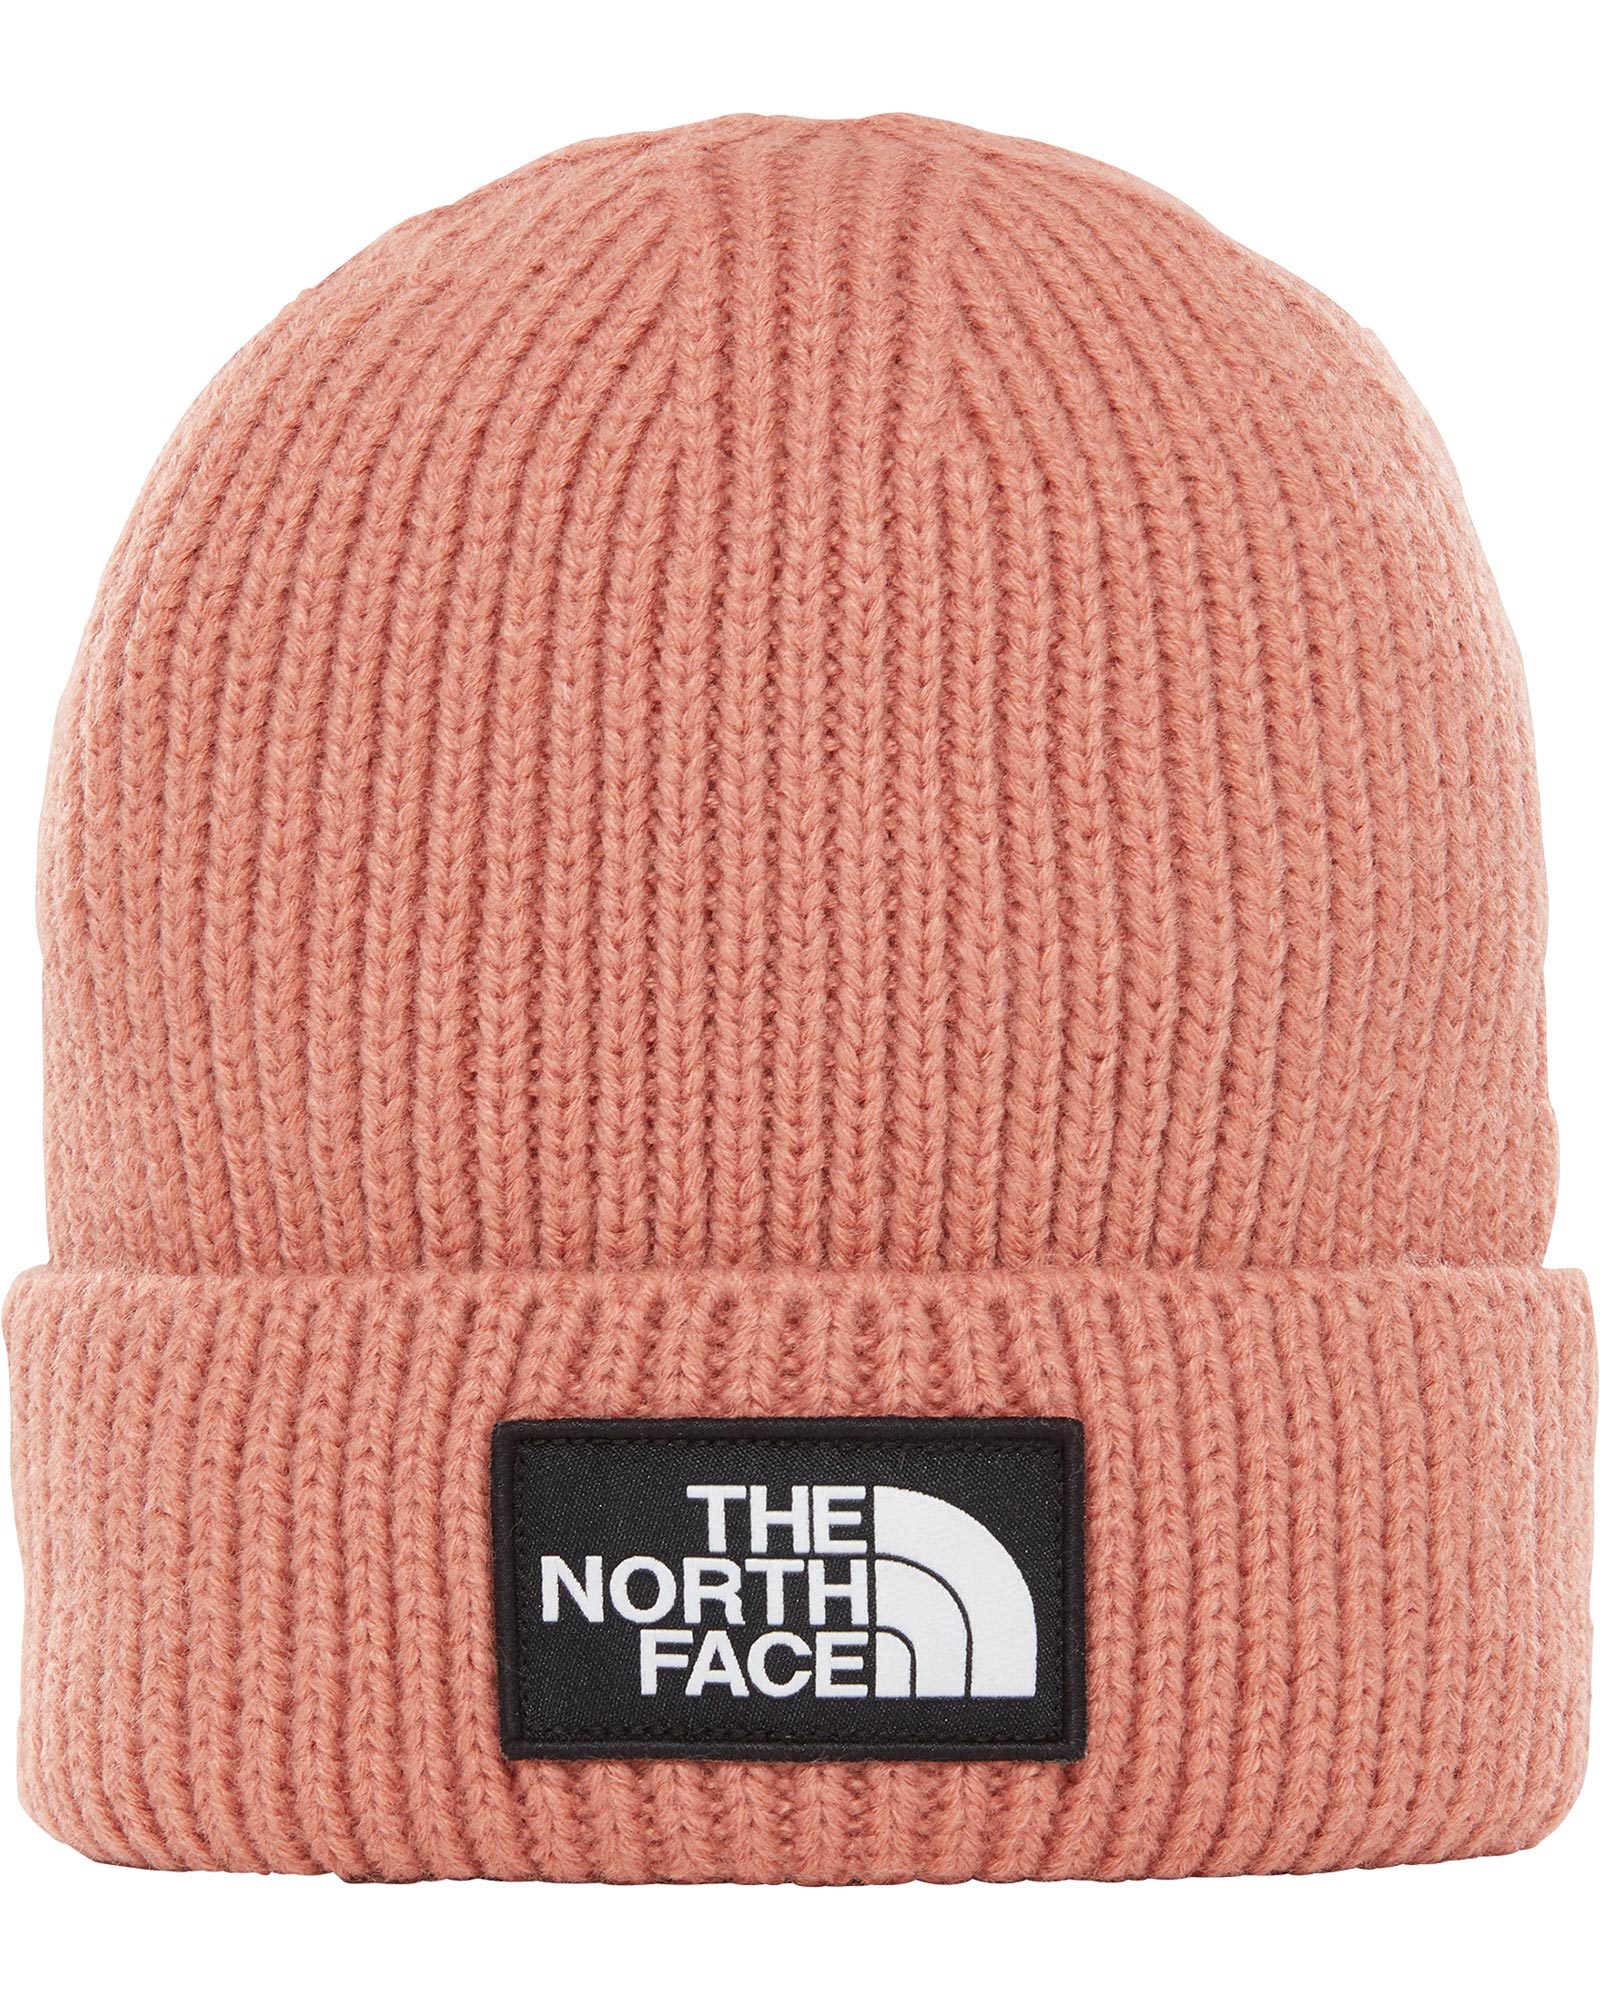 The North Face Logo Box Cuffed Beanie - Orchid Pink